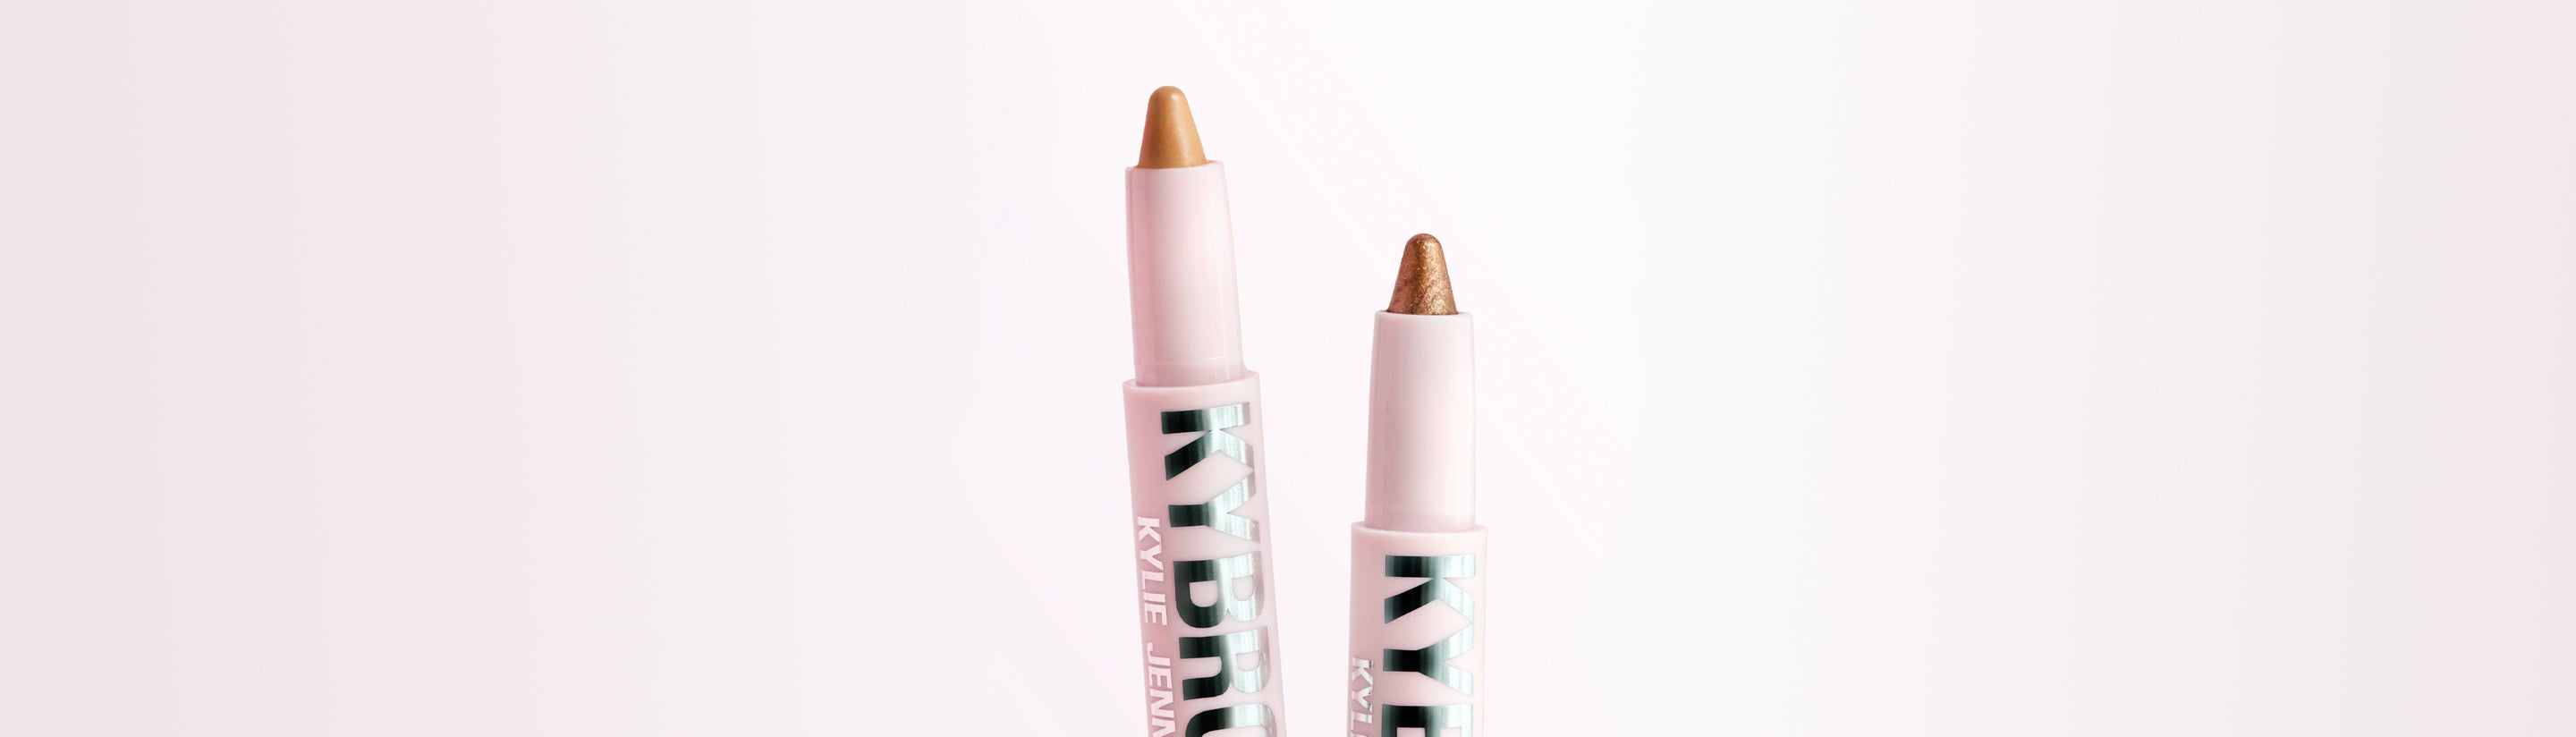 Kylie Cosmetics - Eyebrows - Brow Highlighters